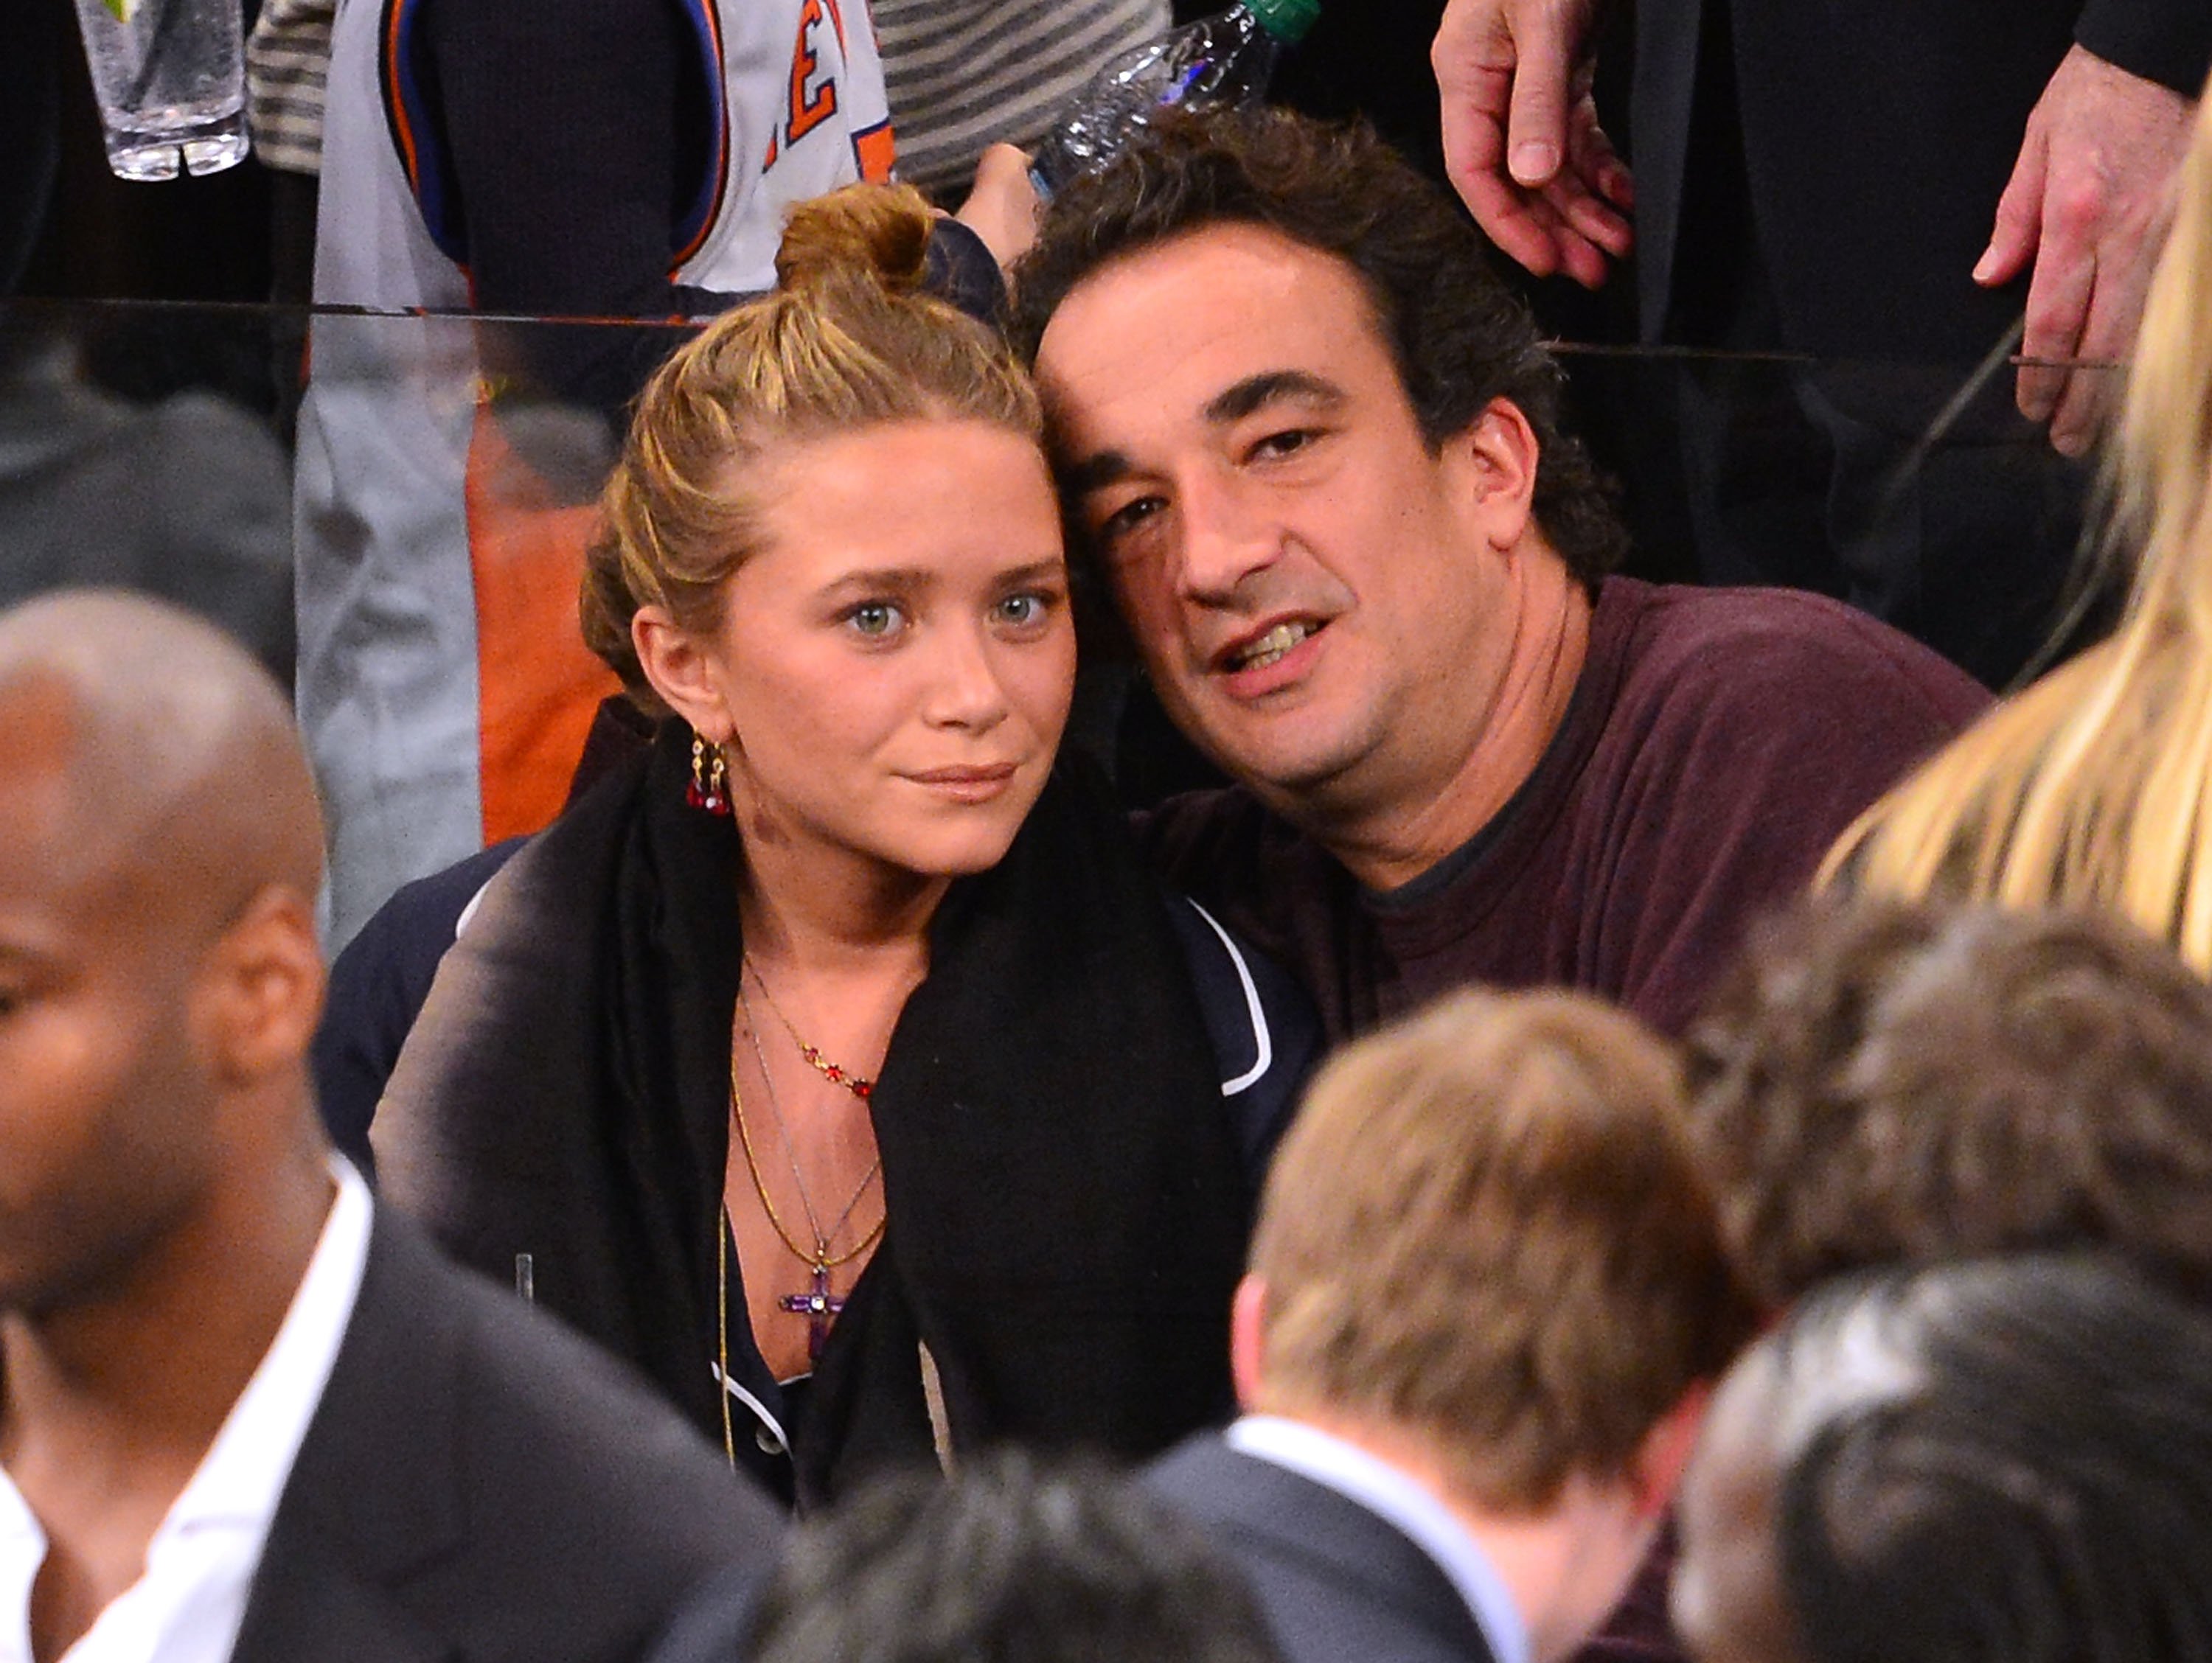 Mary-Kate Olsen and Olivier Sarkozy attending the Dallas Mavericks vs New York Knicks game at Madison Square Garden on November 9, 2012 in New York City. / Source: Getty Images